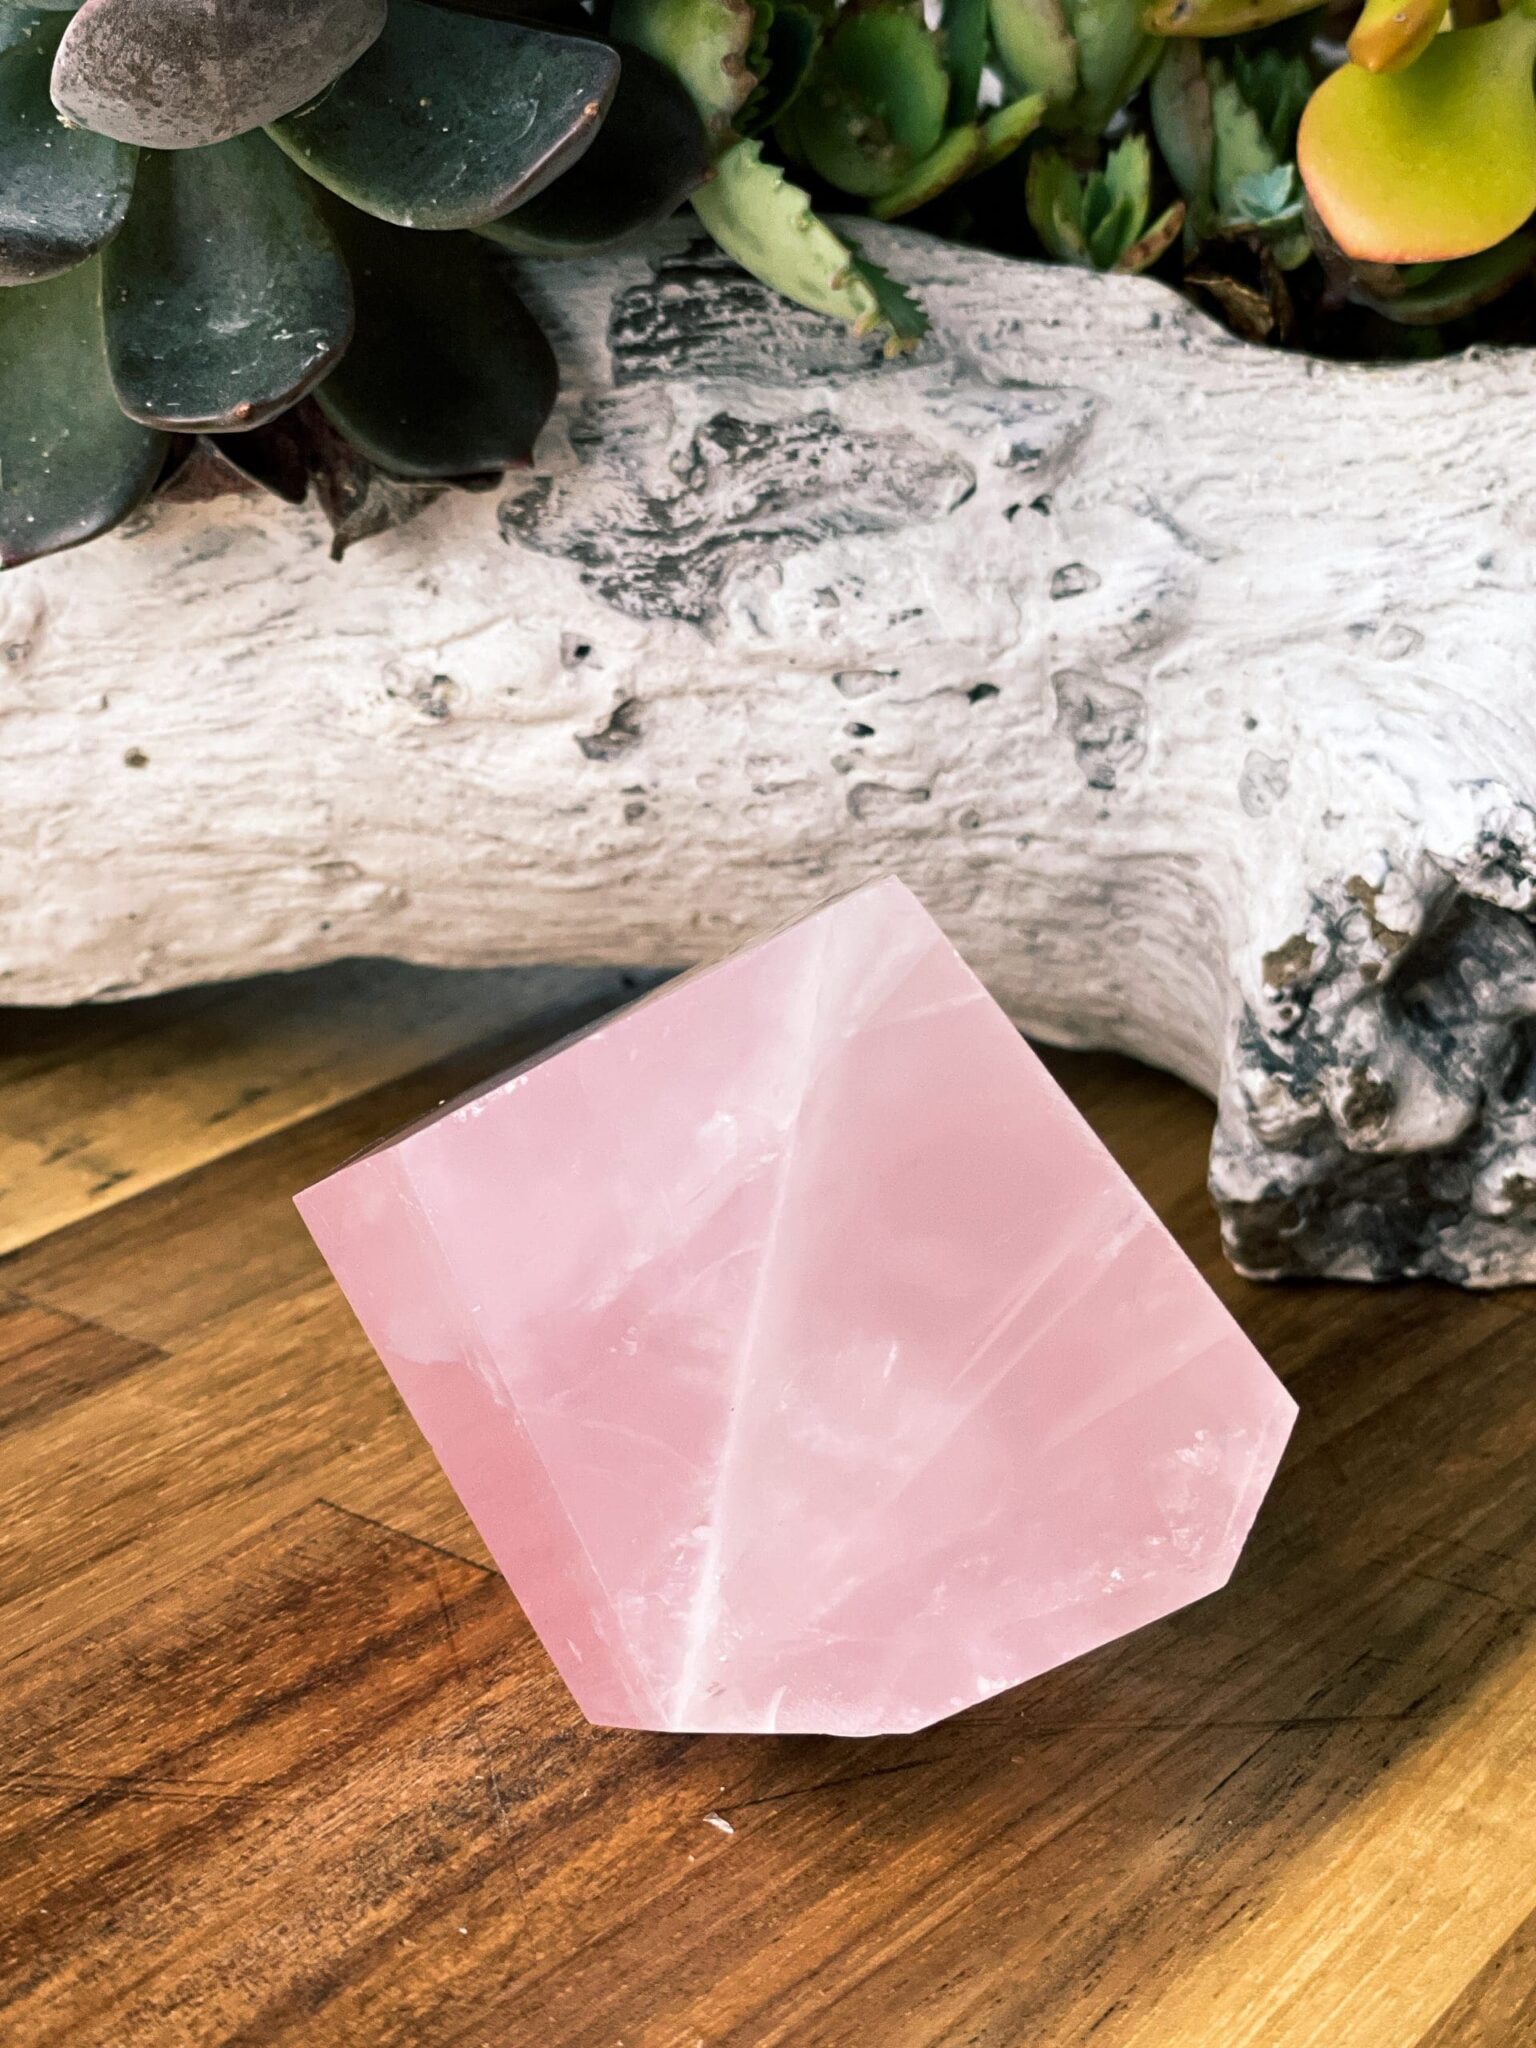 Rose Quartz: Meaning, Healing Properties and Powers